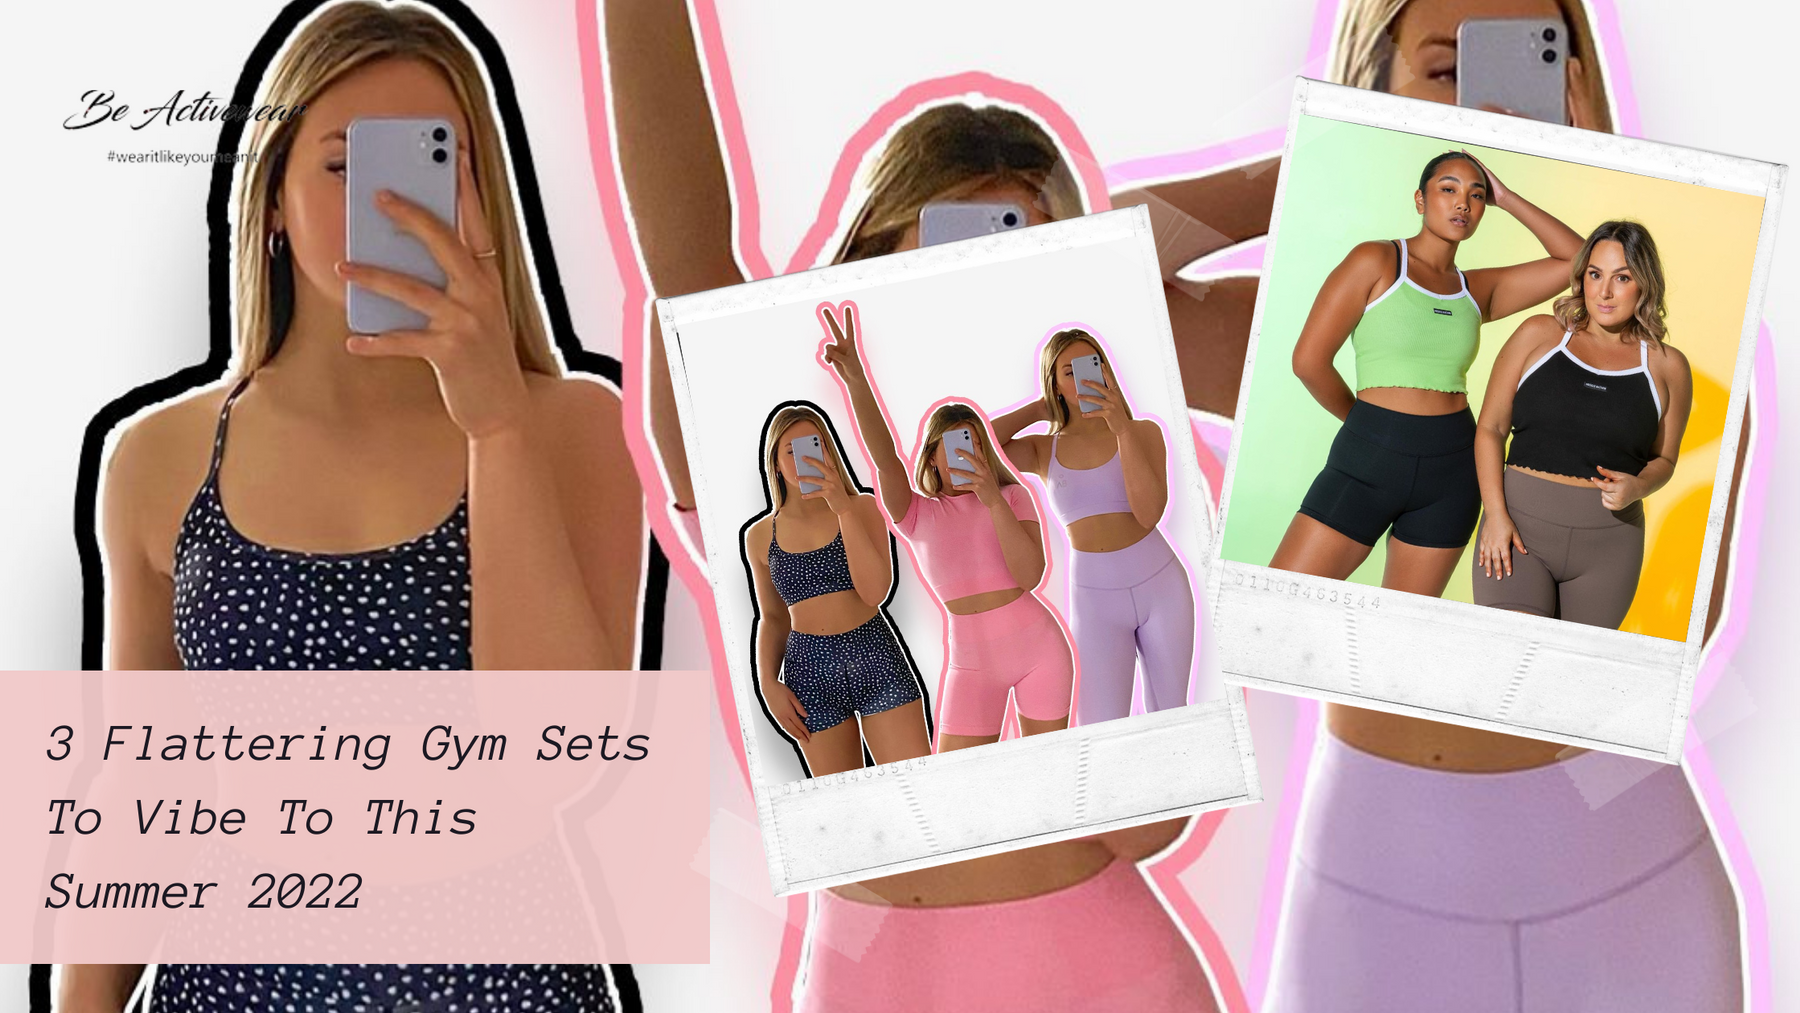 3 Flattering Gym Sets To Vibe To This Summer 2022